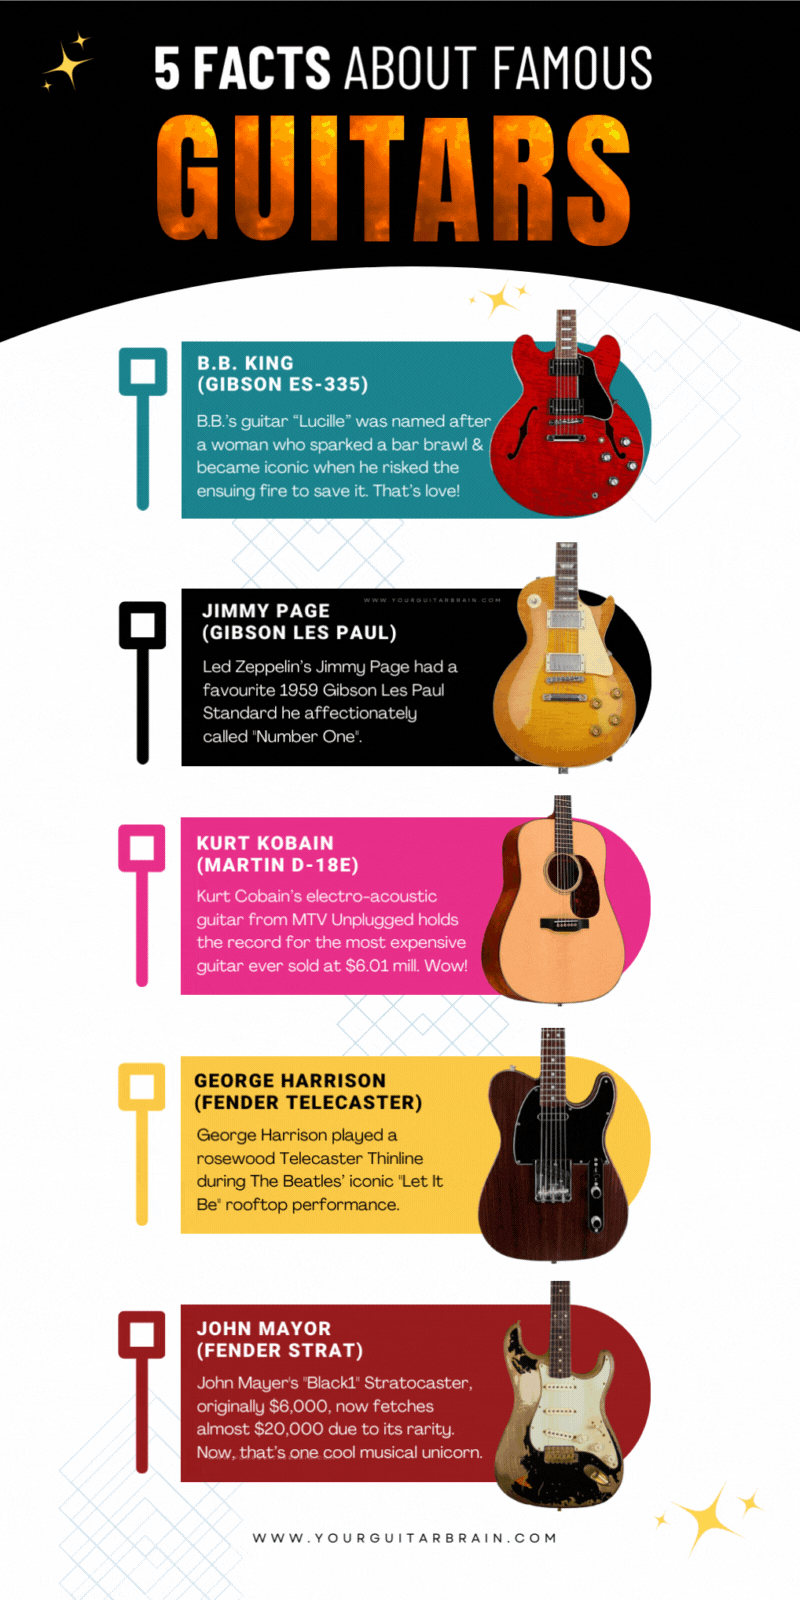 Guitar, History, Types, & Facts